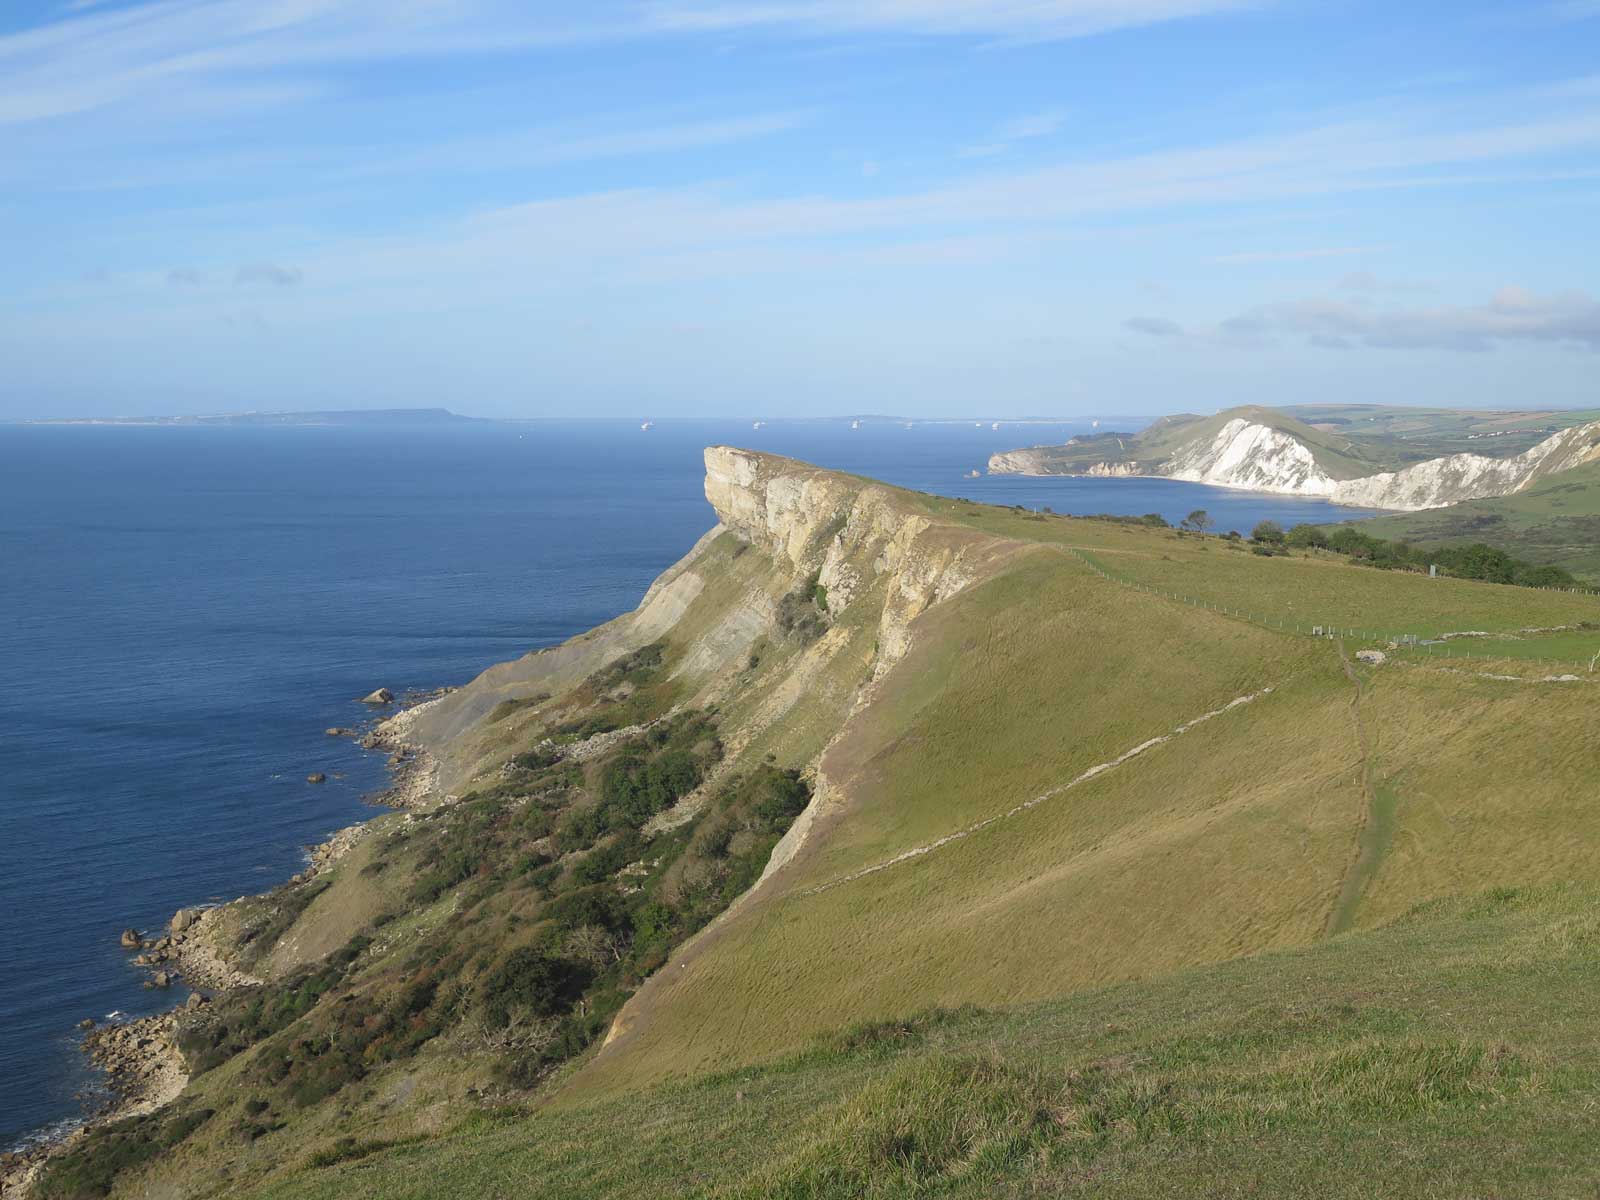 Gad Cliff. Behind it is (left) the island of Portland and (right) Worbarrow Bay. Distant white dots are moored cruise ships.